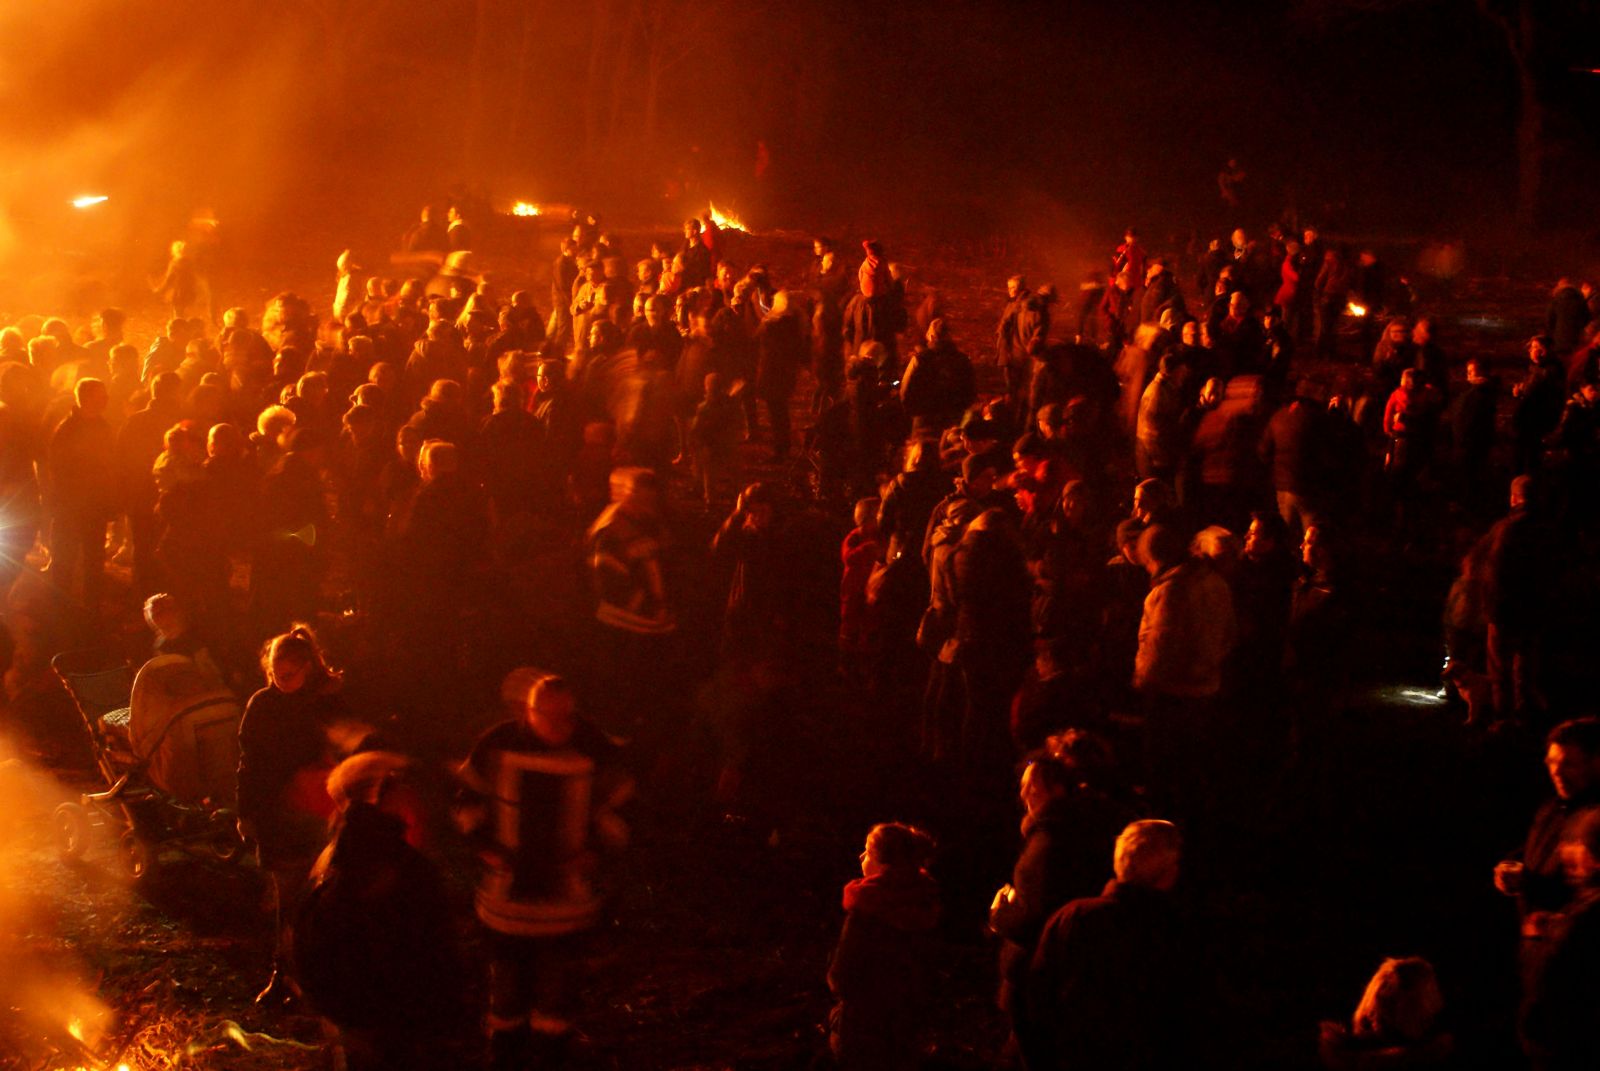 2019 04 20 Osterfeuer Zeven1